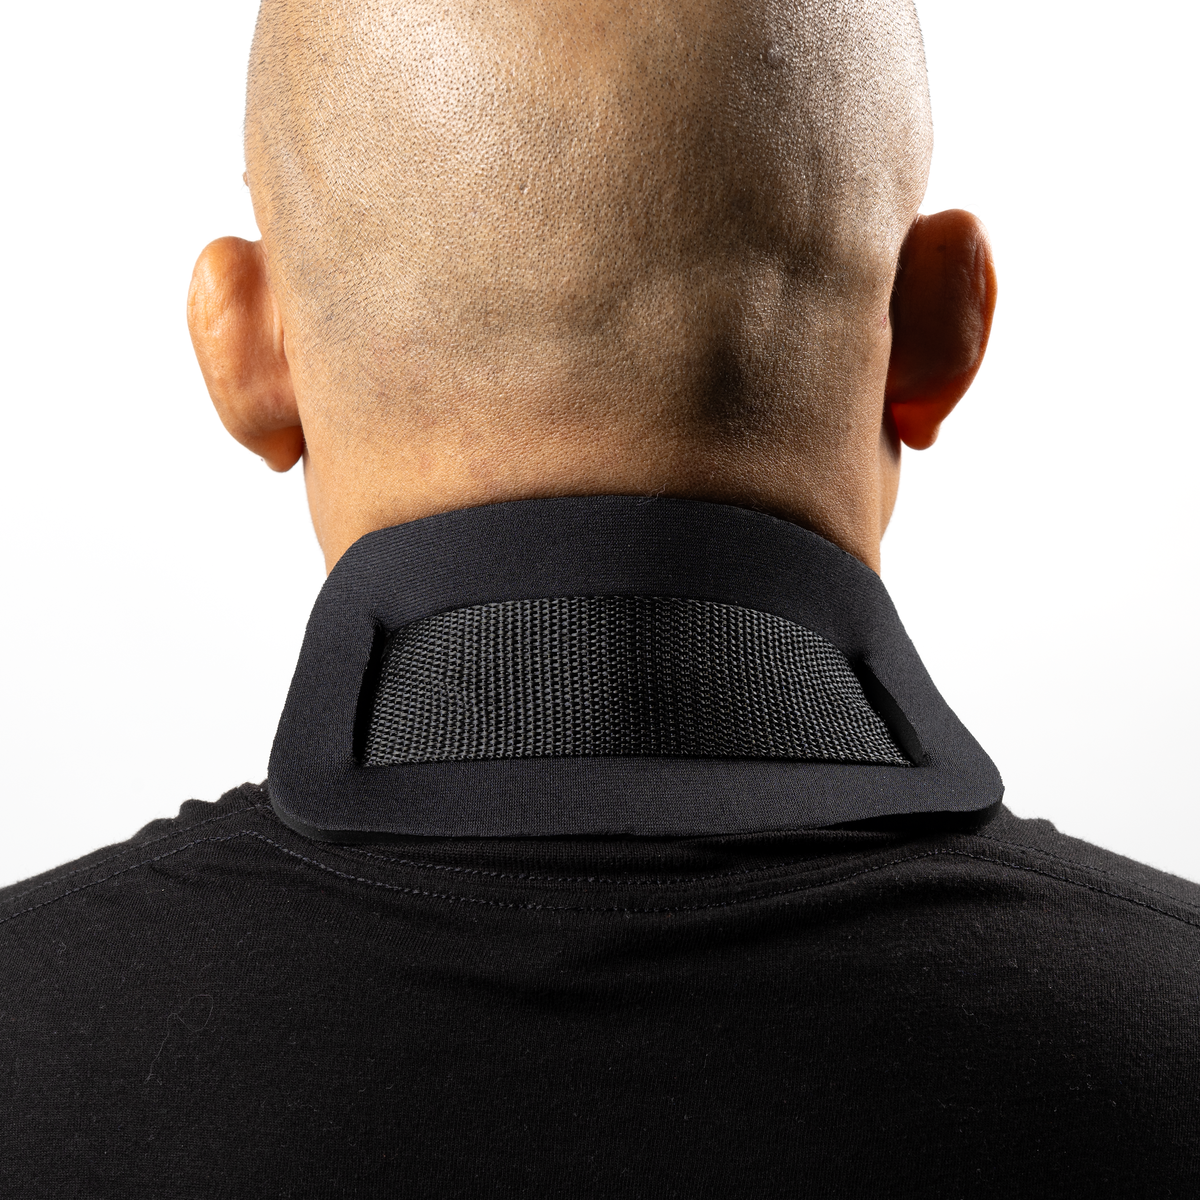 Fitway Equip. Bicep Bomber view of neck pad | Fitness Experience